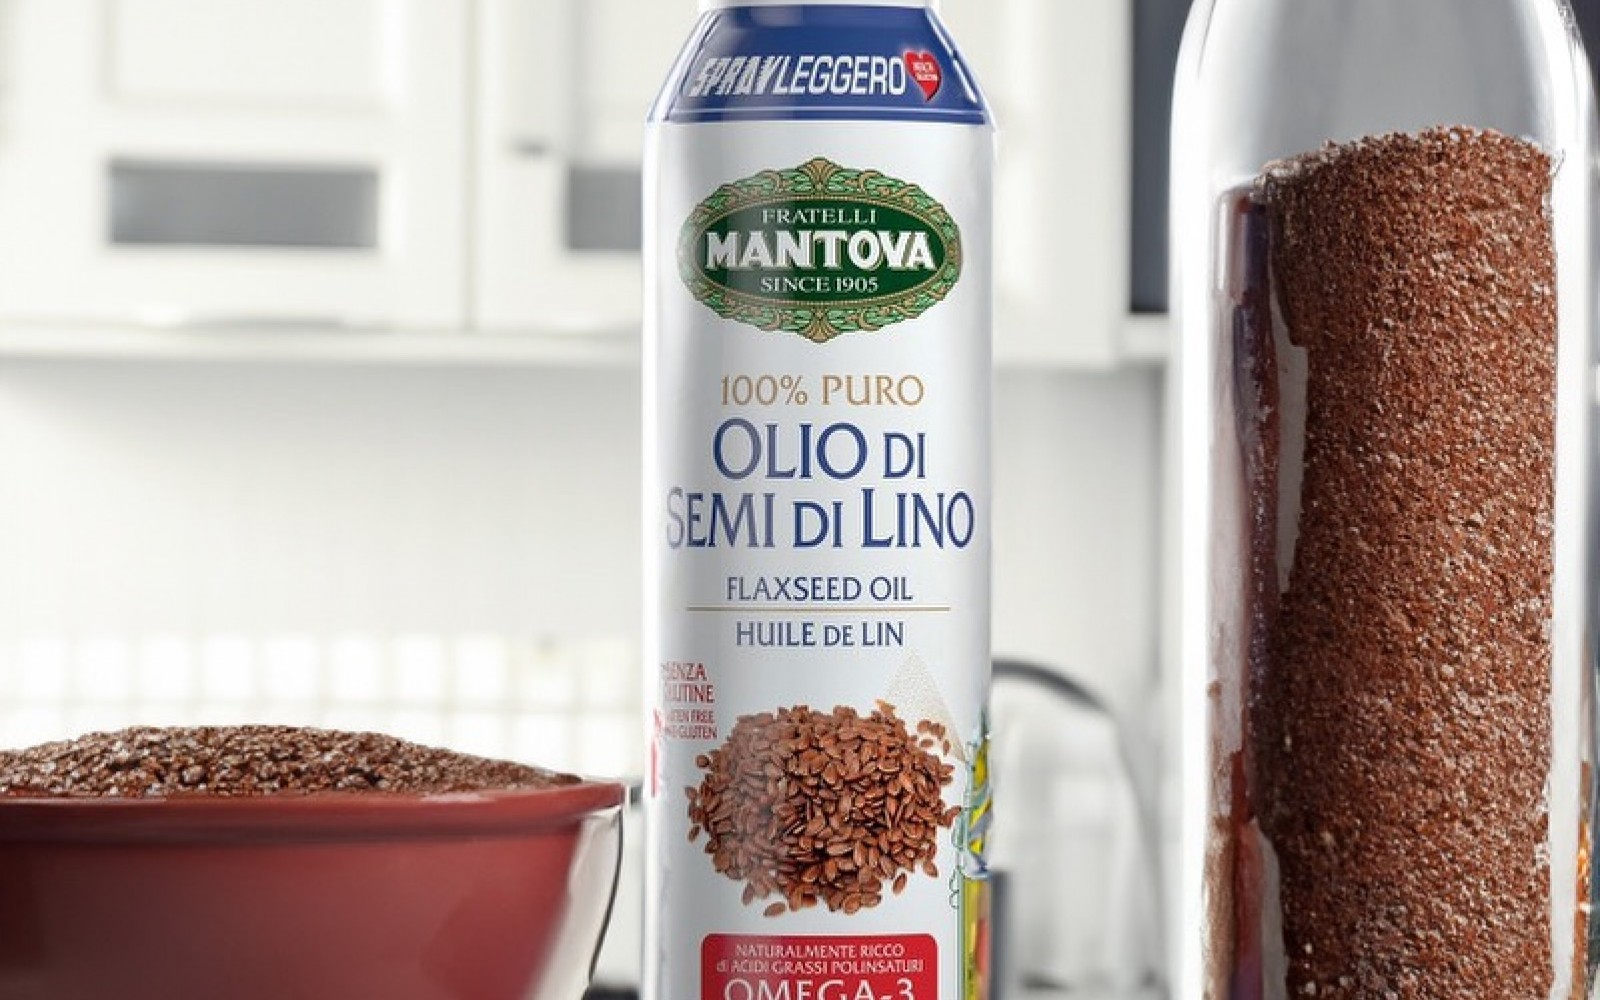 Mantova linseed oil spray is available on the shelves of Auchan